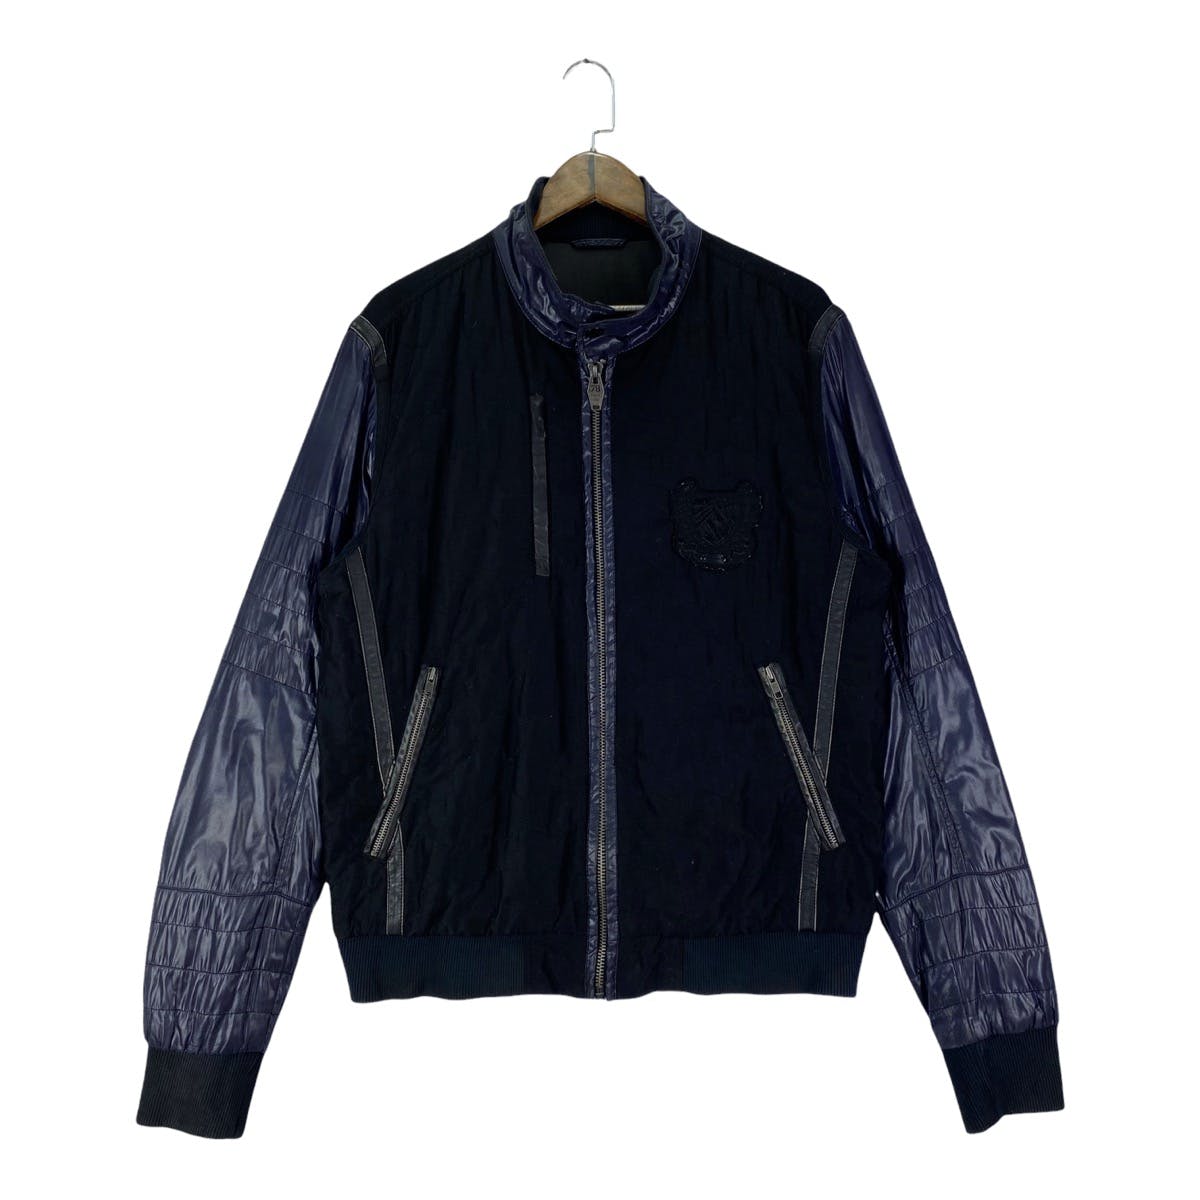 Diesel Honeycomb Quilted Bomber Jacket - 2